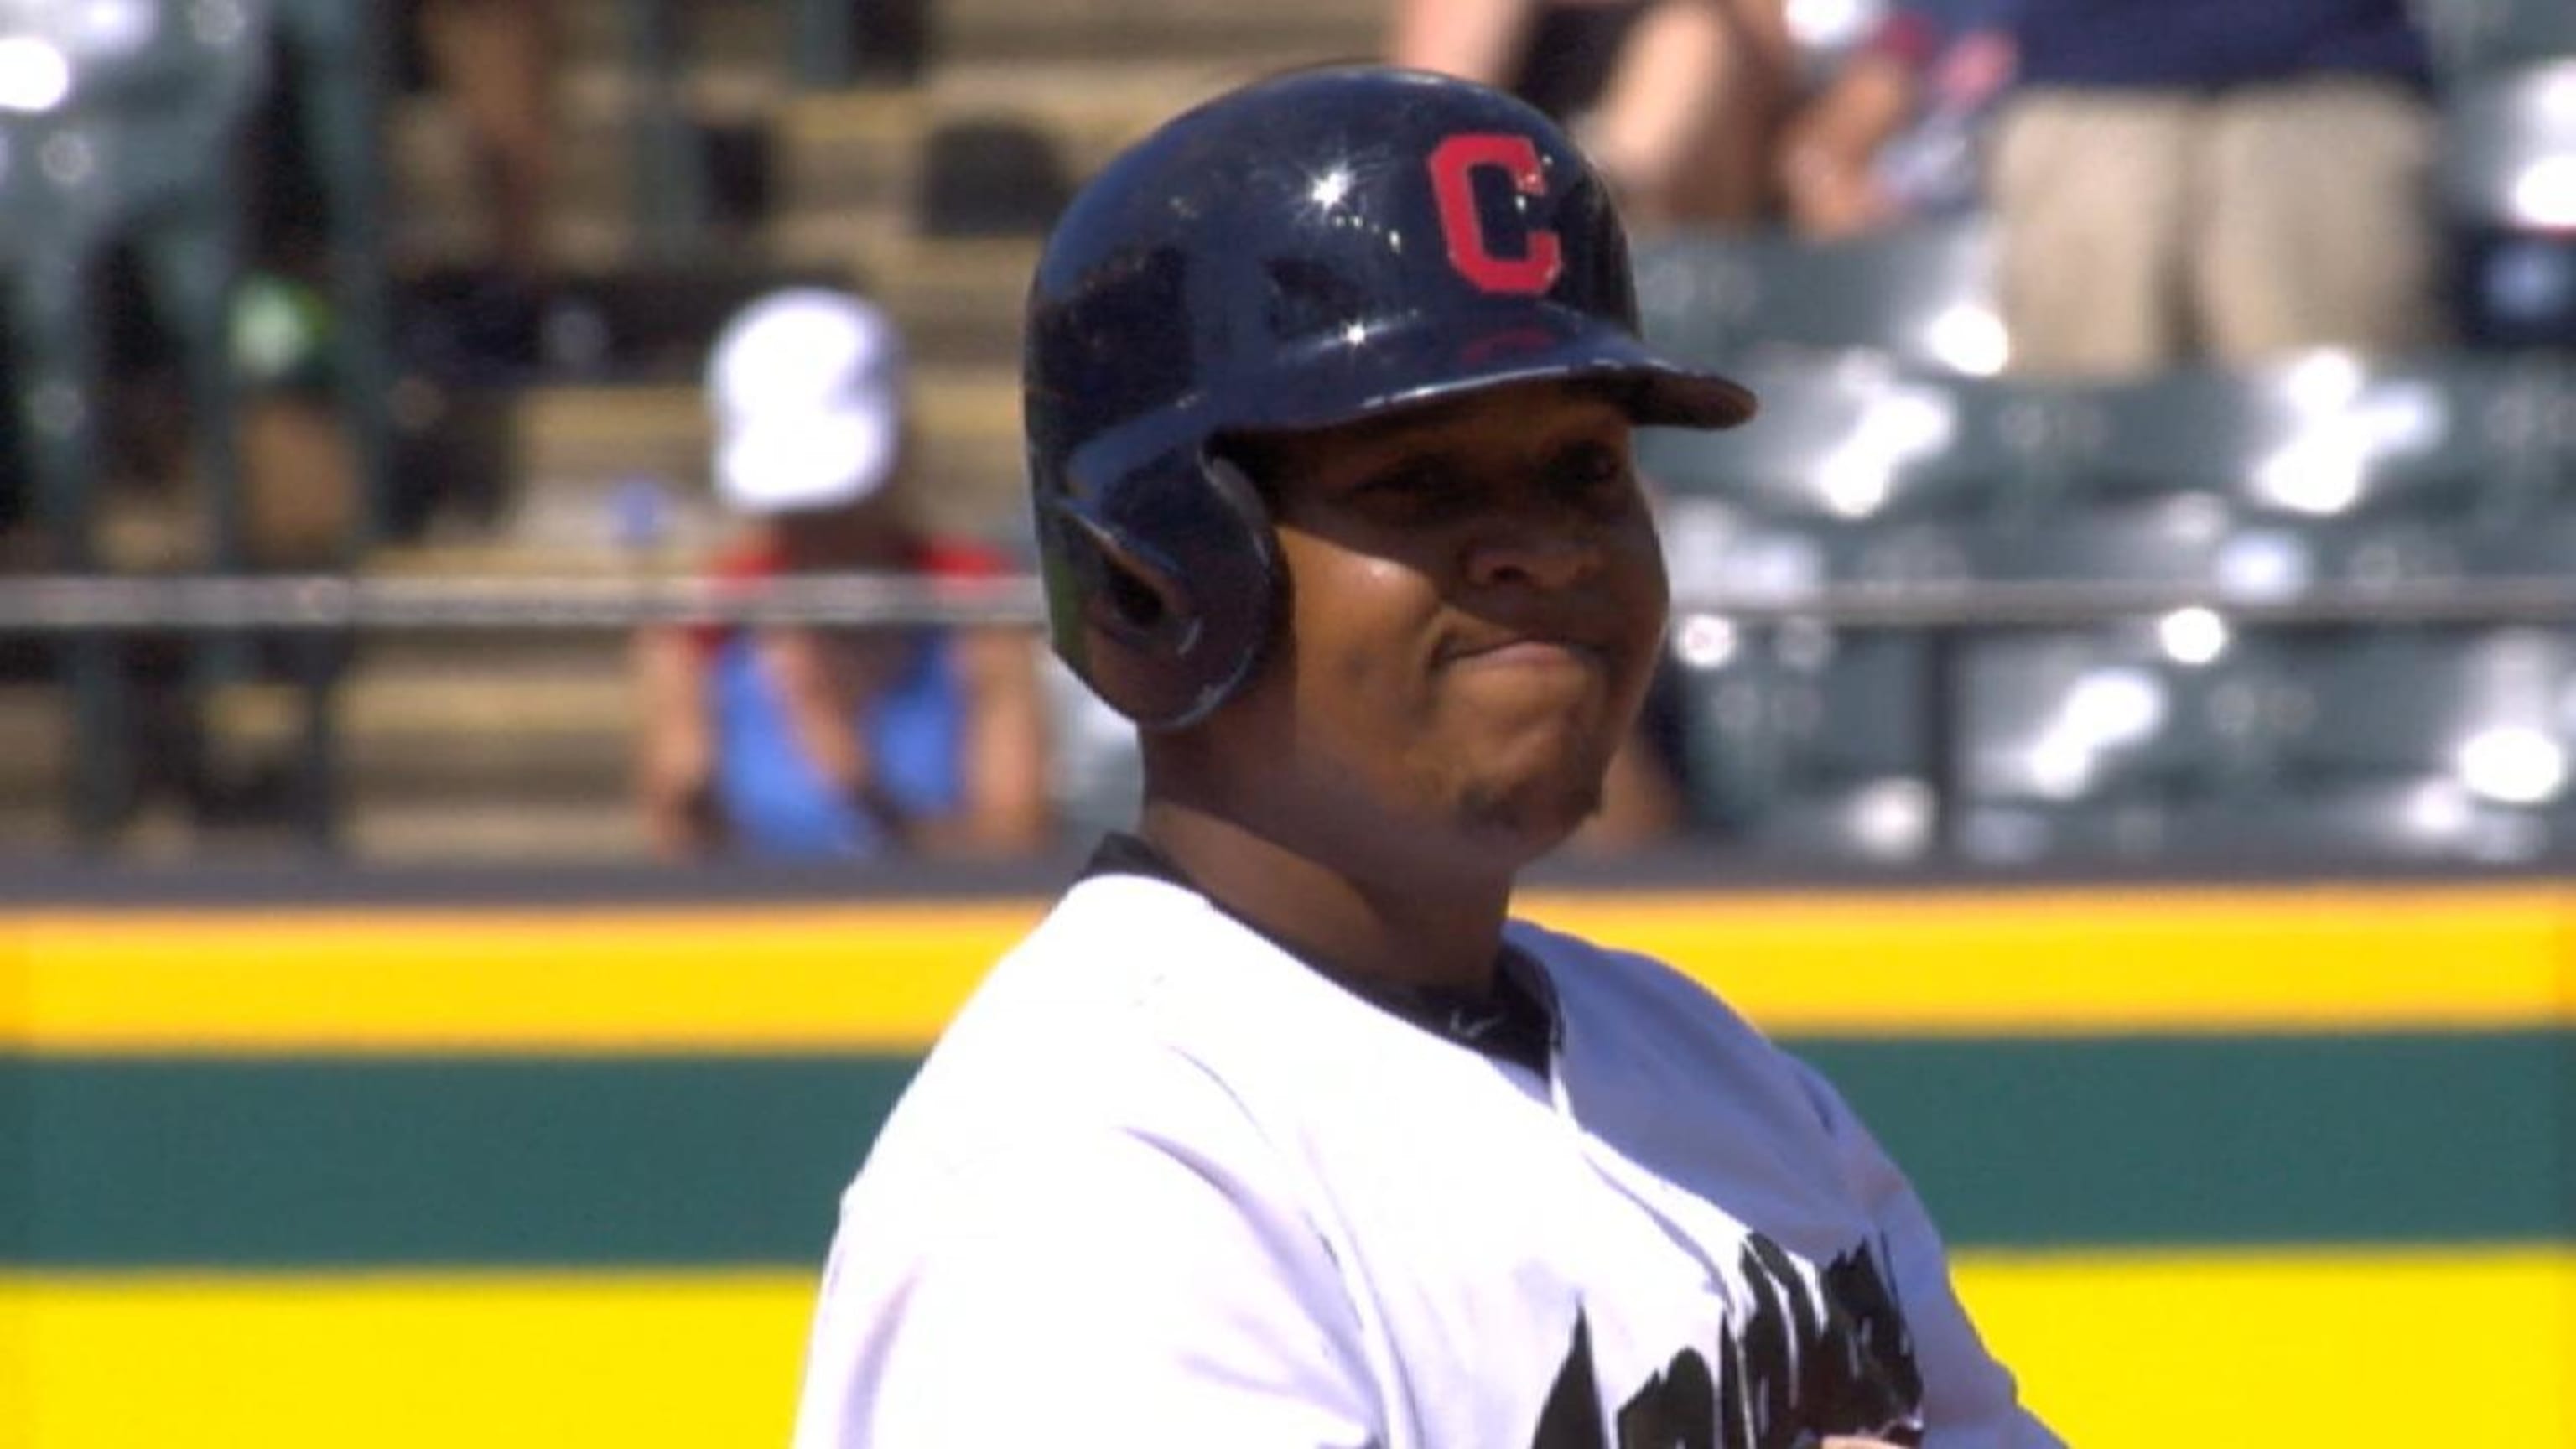 Rising star: Indians' Ramirez blossoms into MVP candidate